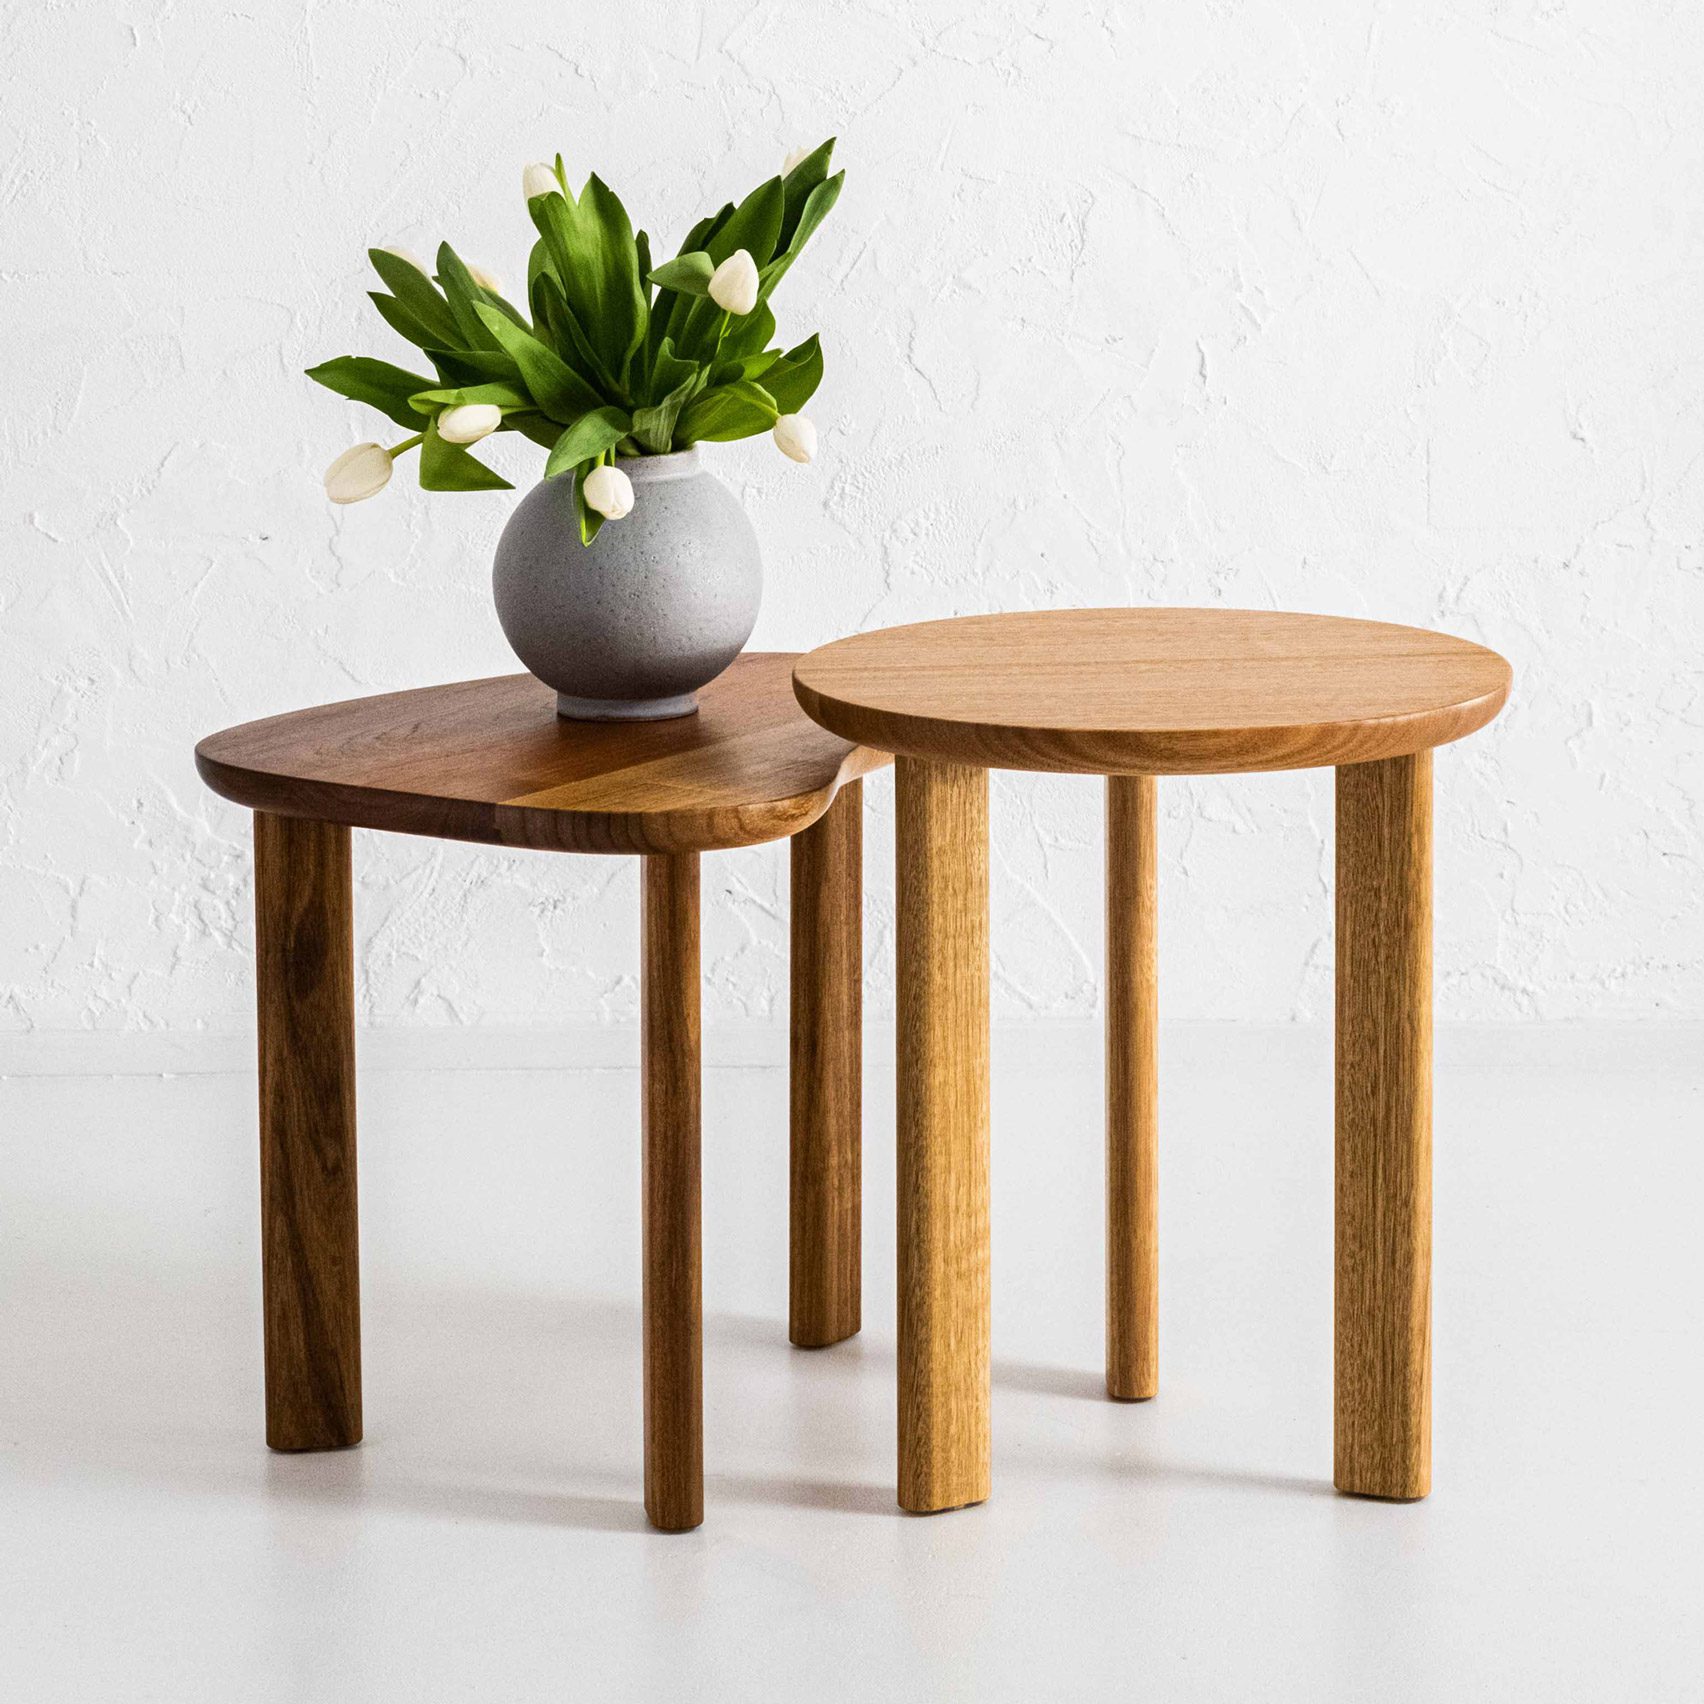 Set of Pebble Side Tables by Andrew Carvolth for JamFactory